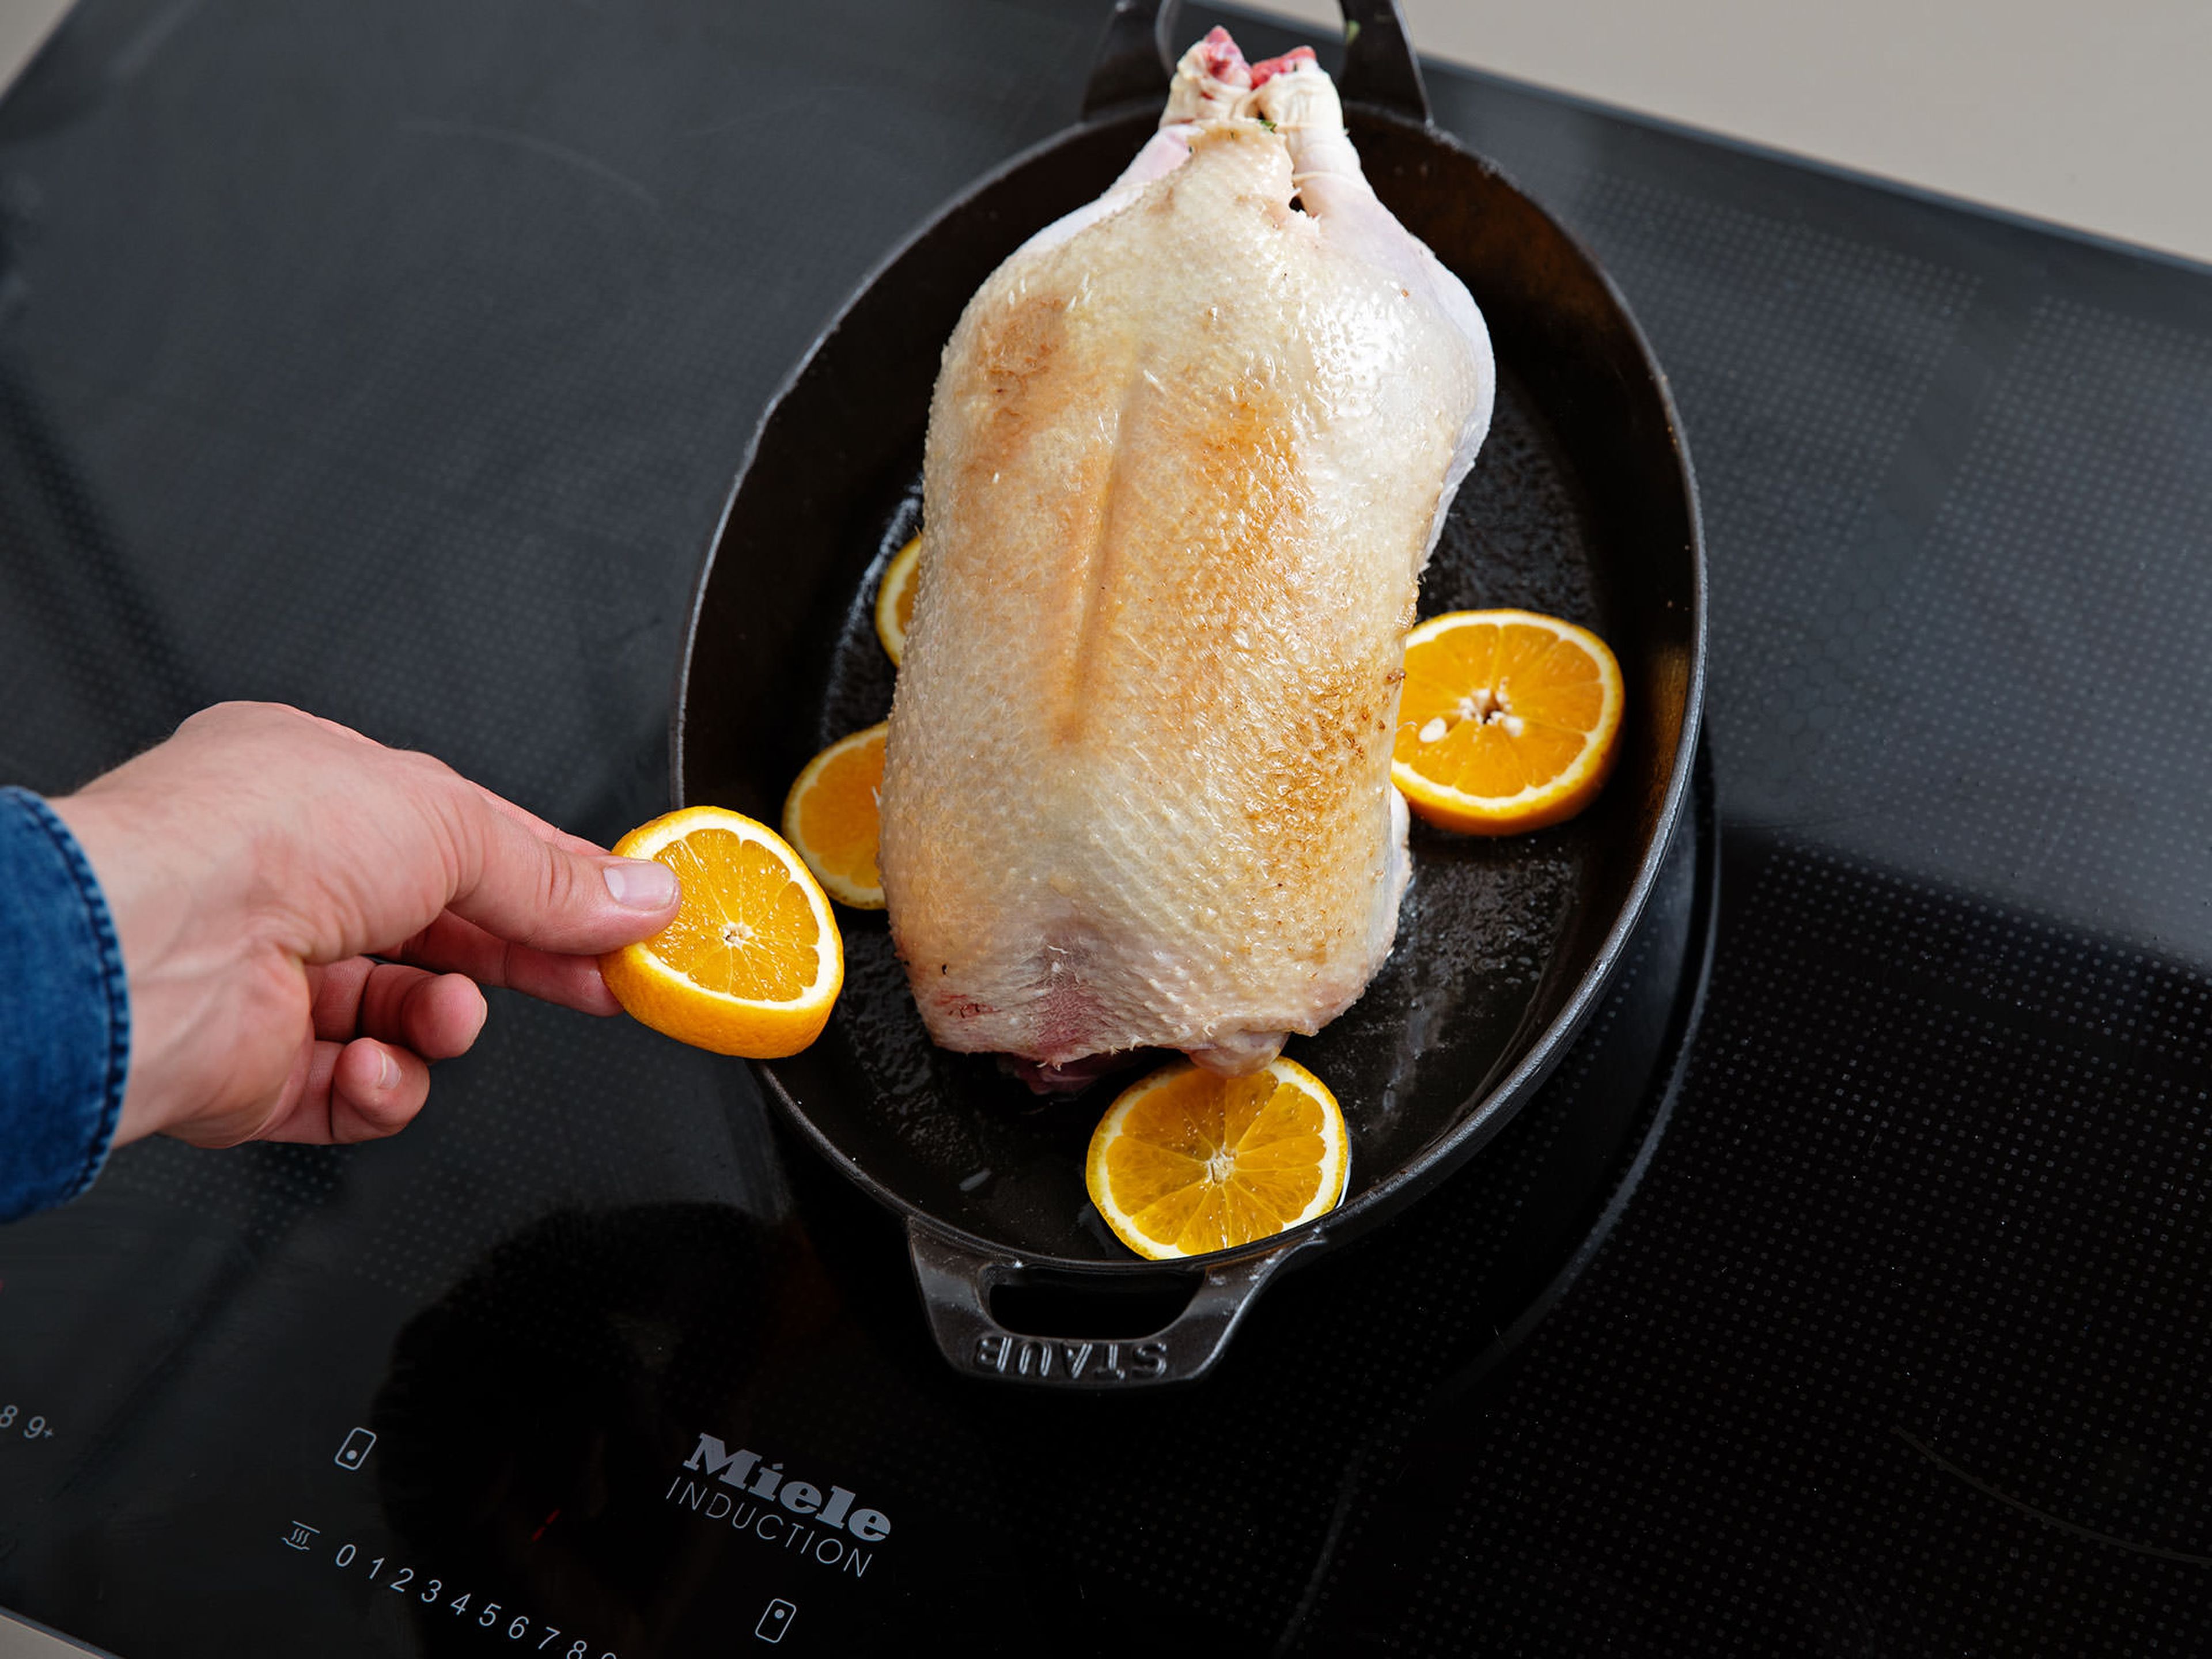 Fry in the roasting pan until golden on both sides. Slice another orange. Remove the duck from the roasting pan, add orange slices and put the duck back in the pan. Transfer to the oven and roast for approx. 1.5 hrs.